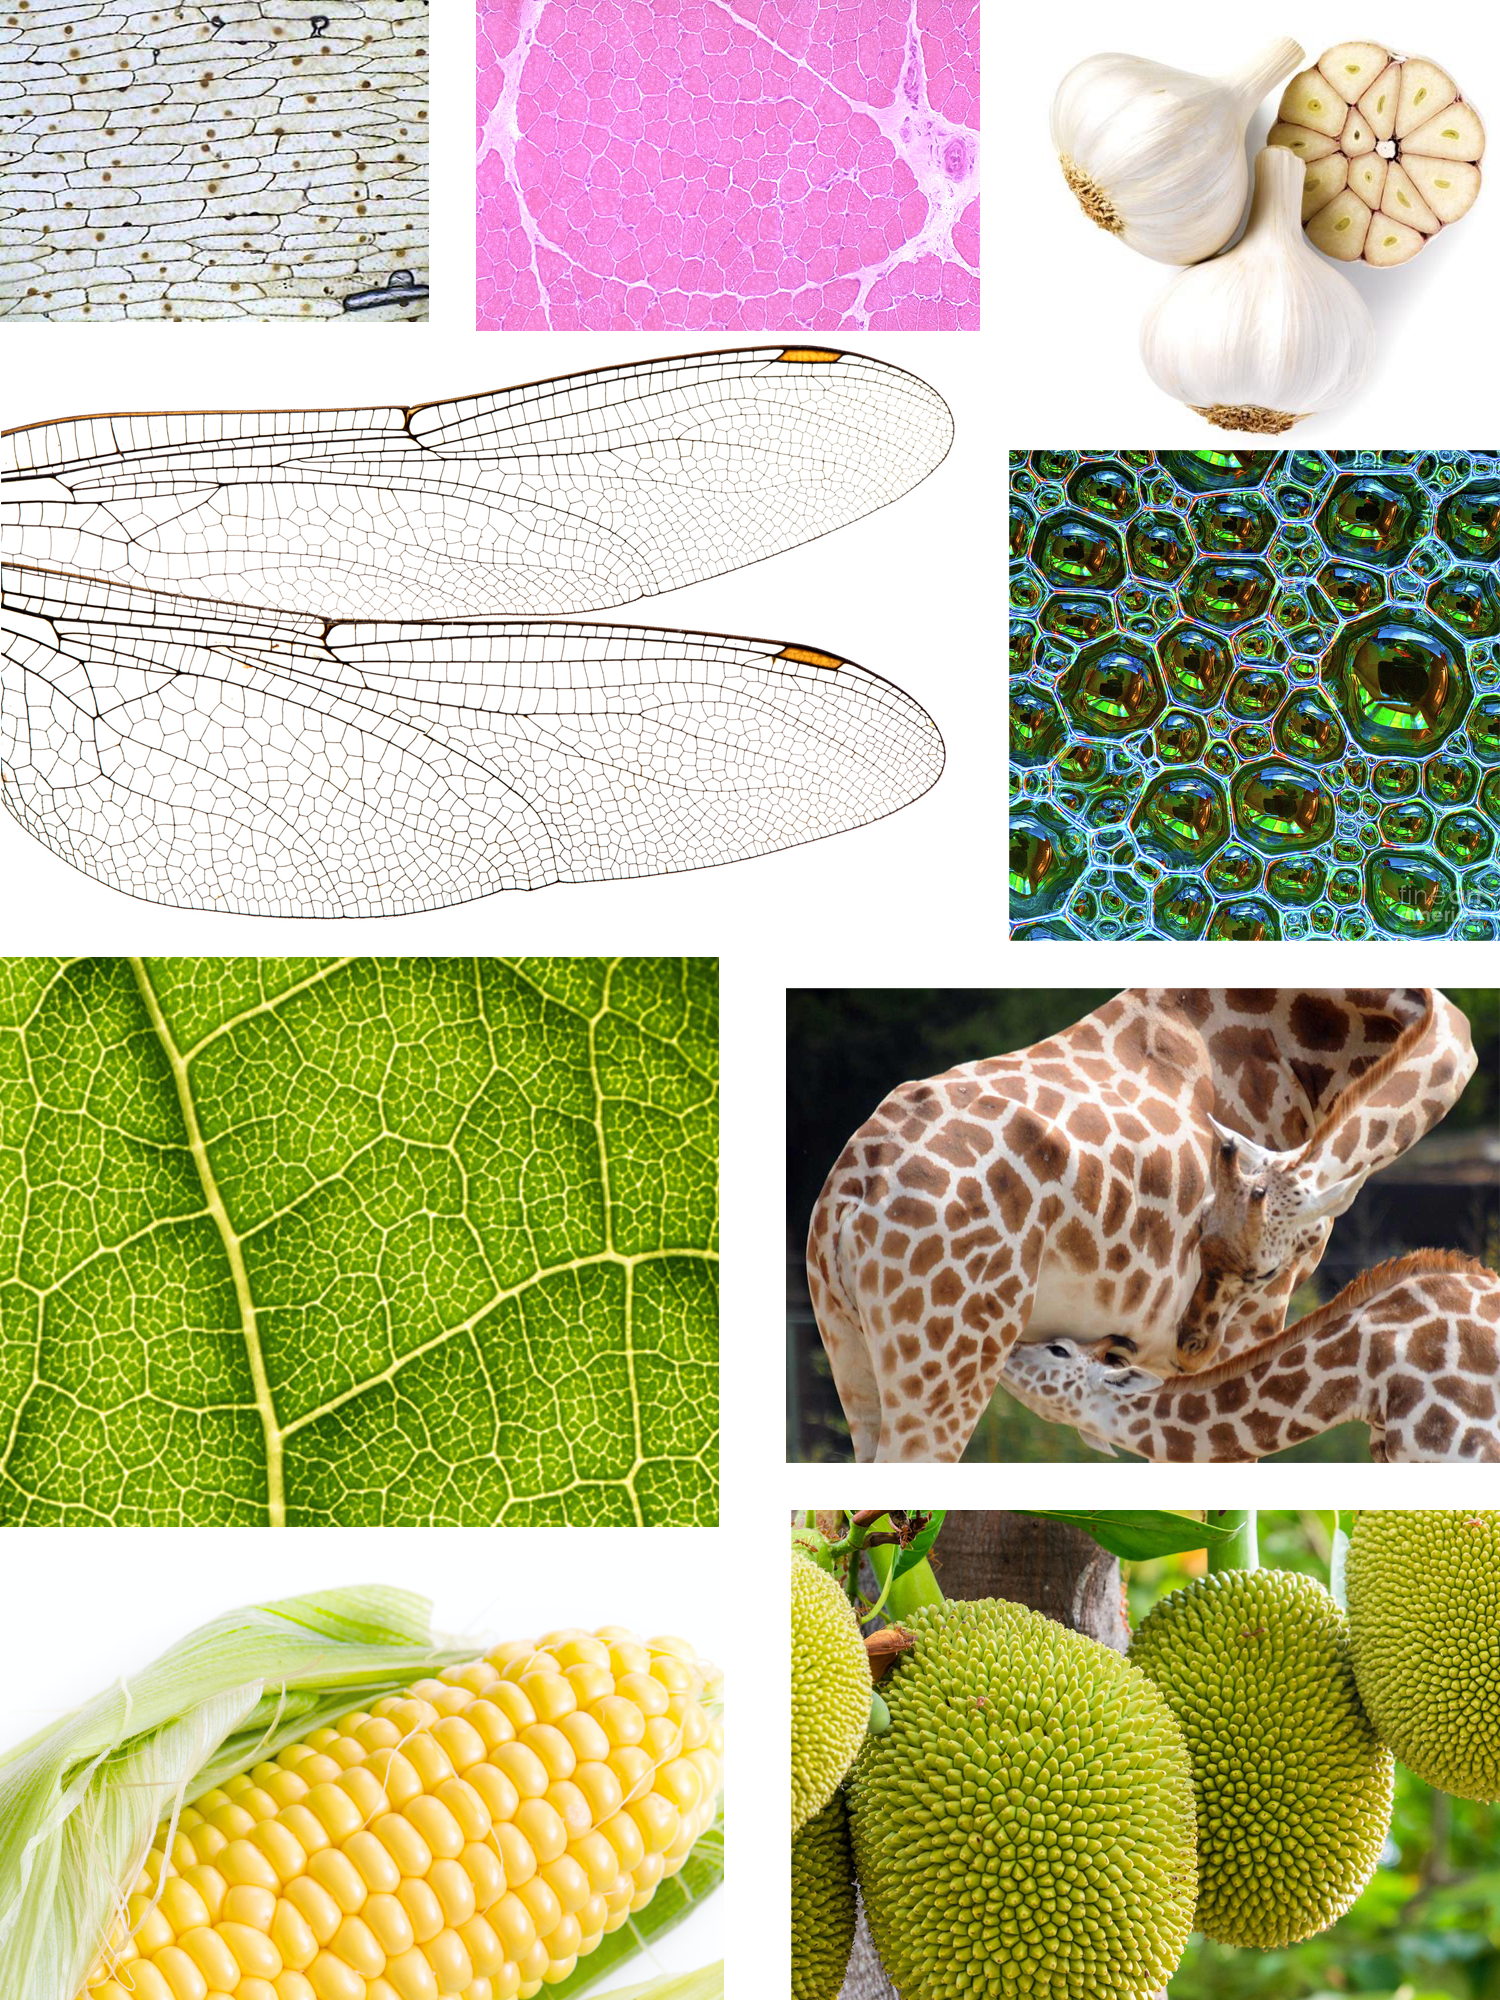 Voronoi patterns are everywhere in nature. <br>(From top-left to bottom right: microscope view of onion skin cells, cross-section of a muscle, garlic bulb, wings of a dragonfly, soap bubbles, close-up of a leaf, giraffes coat patterns, corns, jackfruits hanging from a tree.)